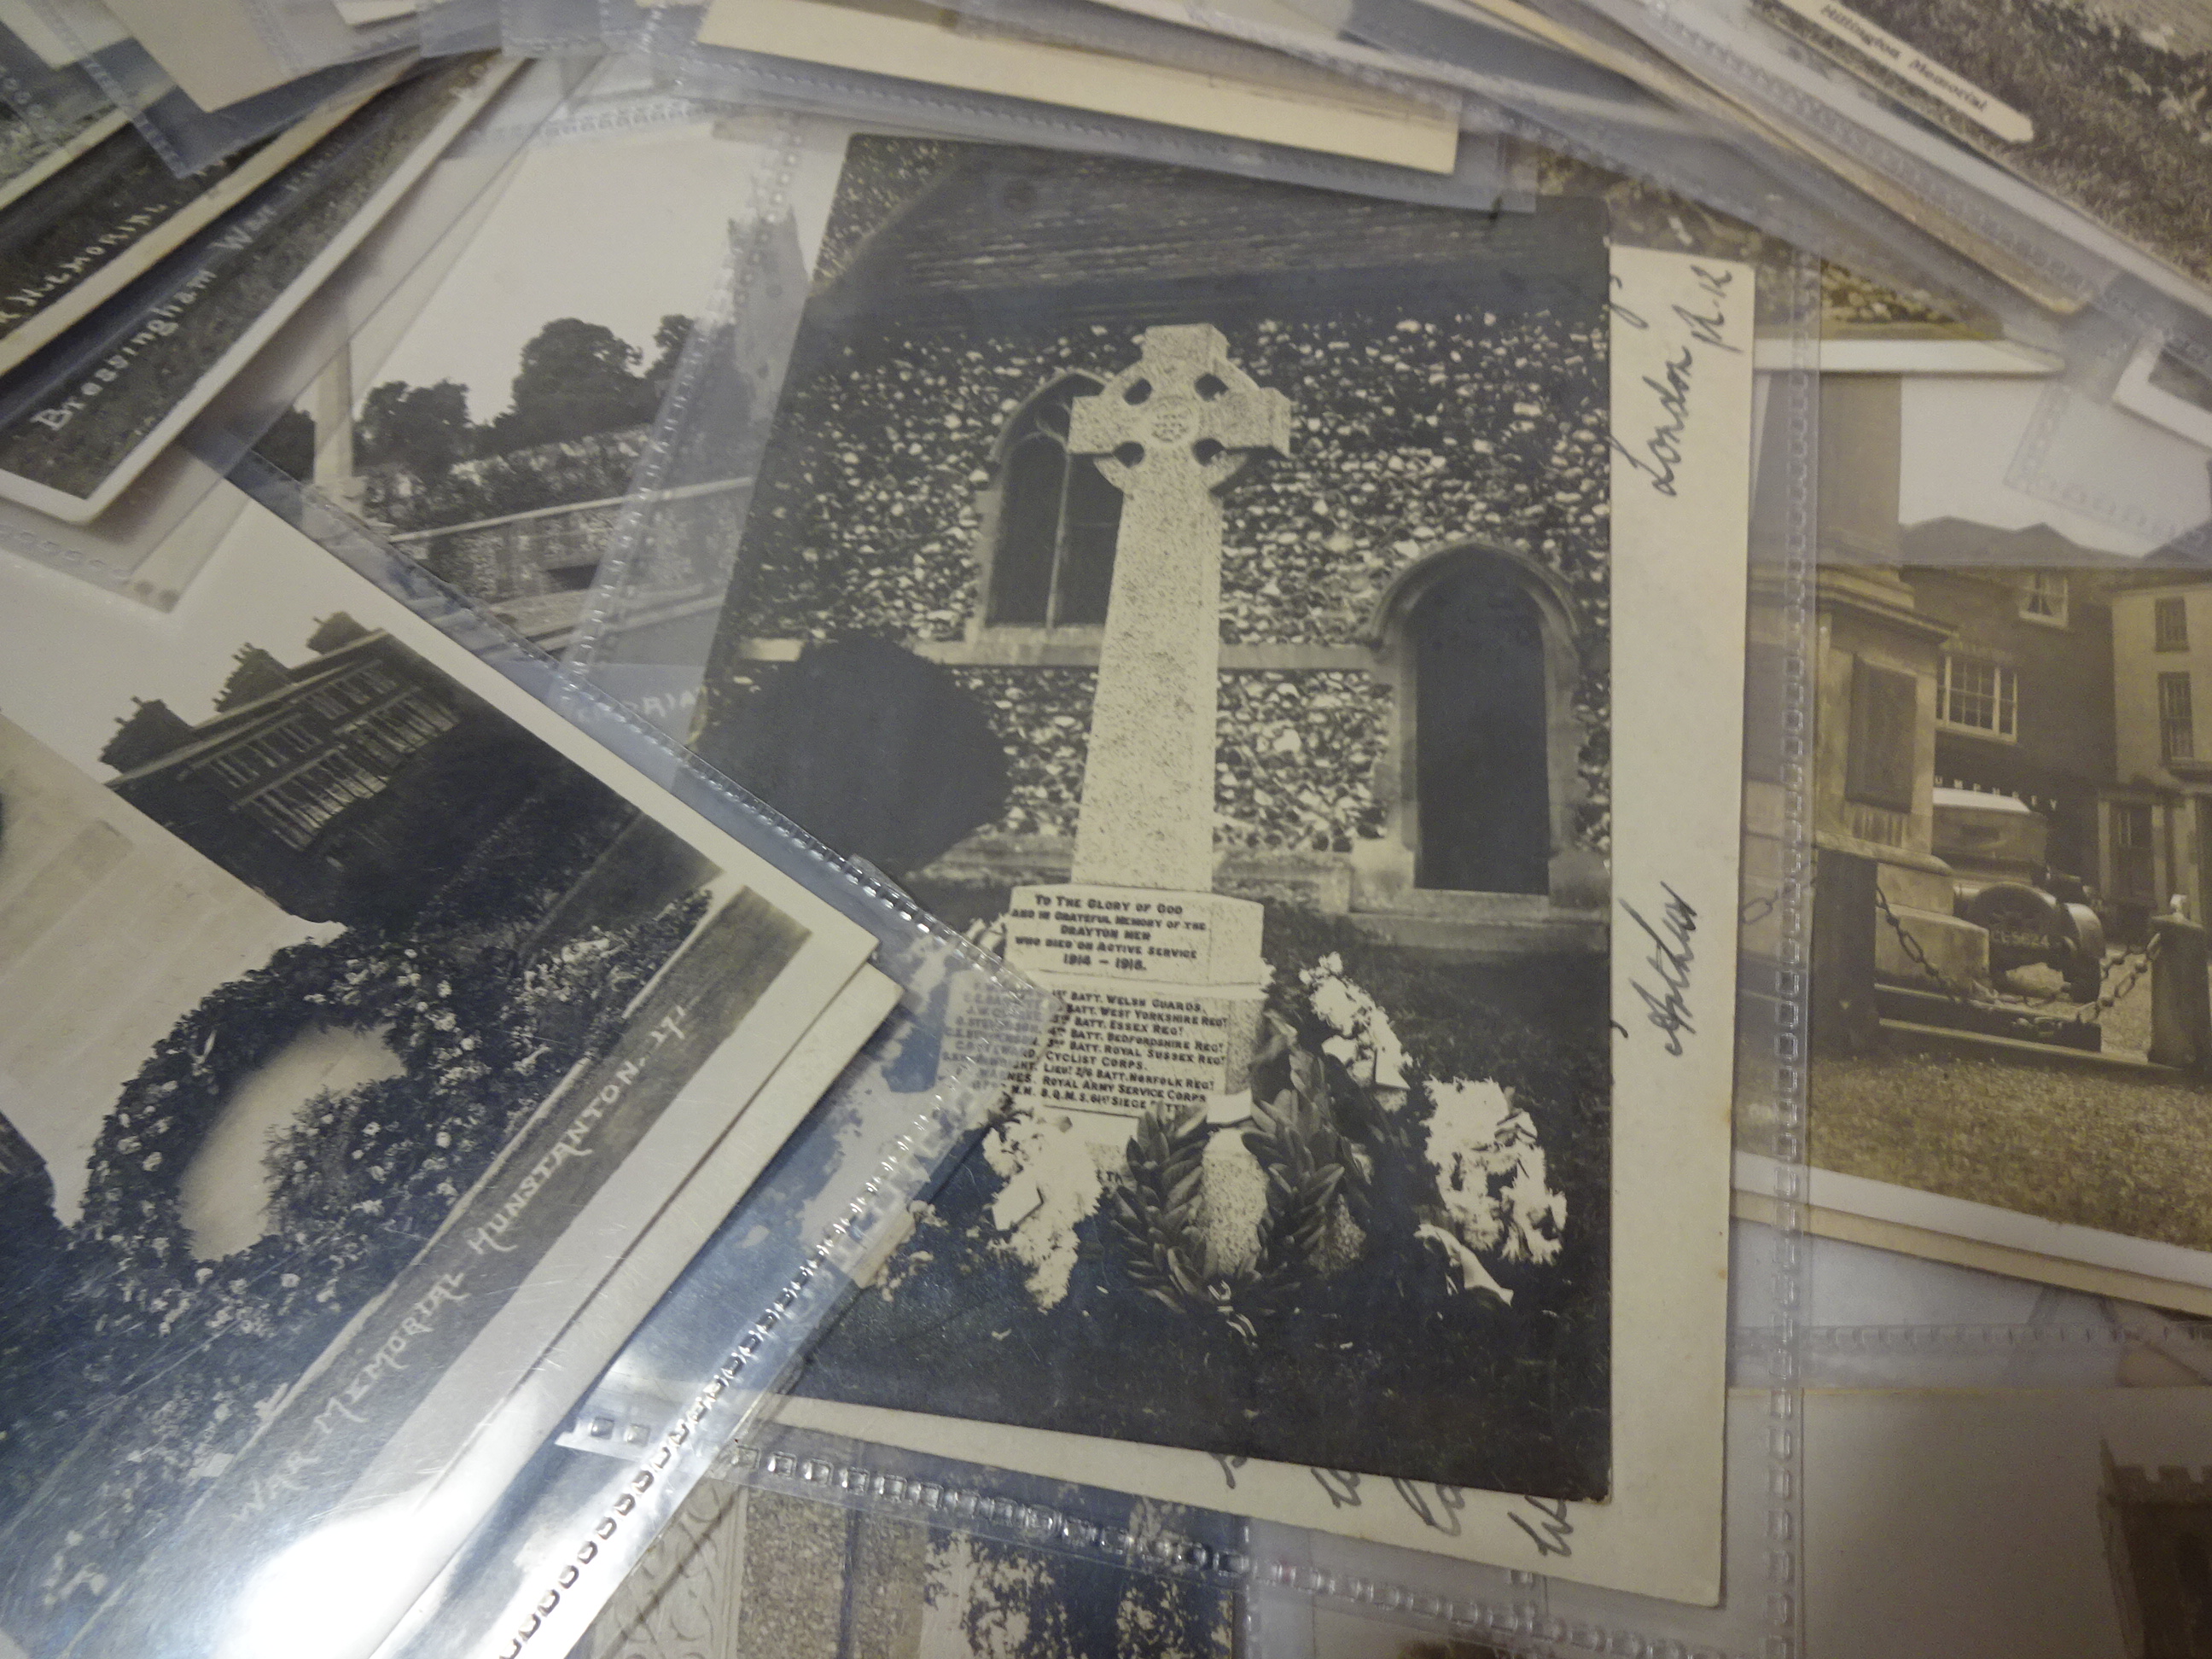 COLLECTION OF 48 MILITARY WW1 RELATED VINTAGE POSTCARDS DEPICTING THE WAR MEMORIALS AROUND NORFOLK, - Image 2 of 4